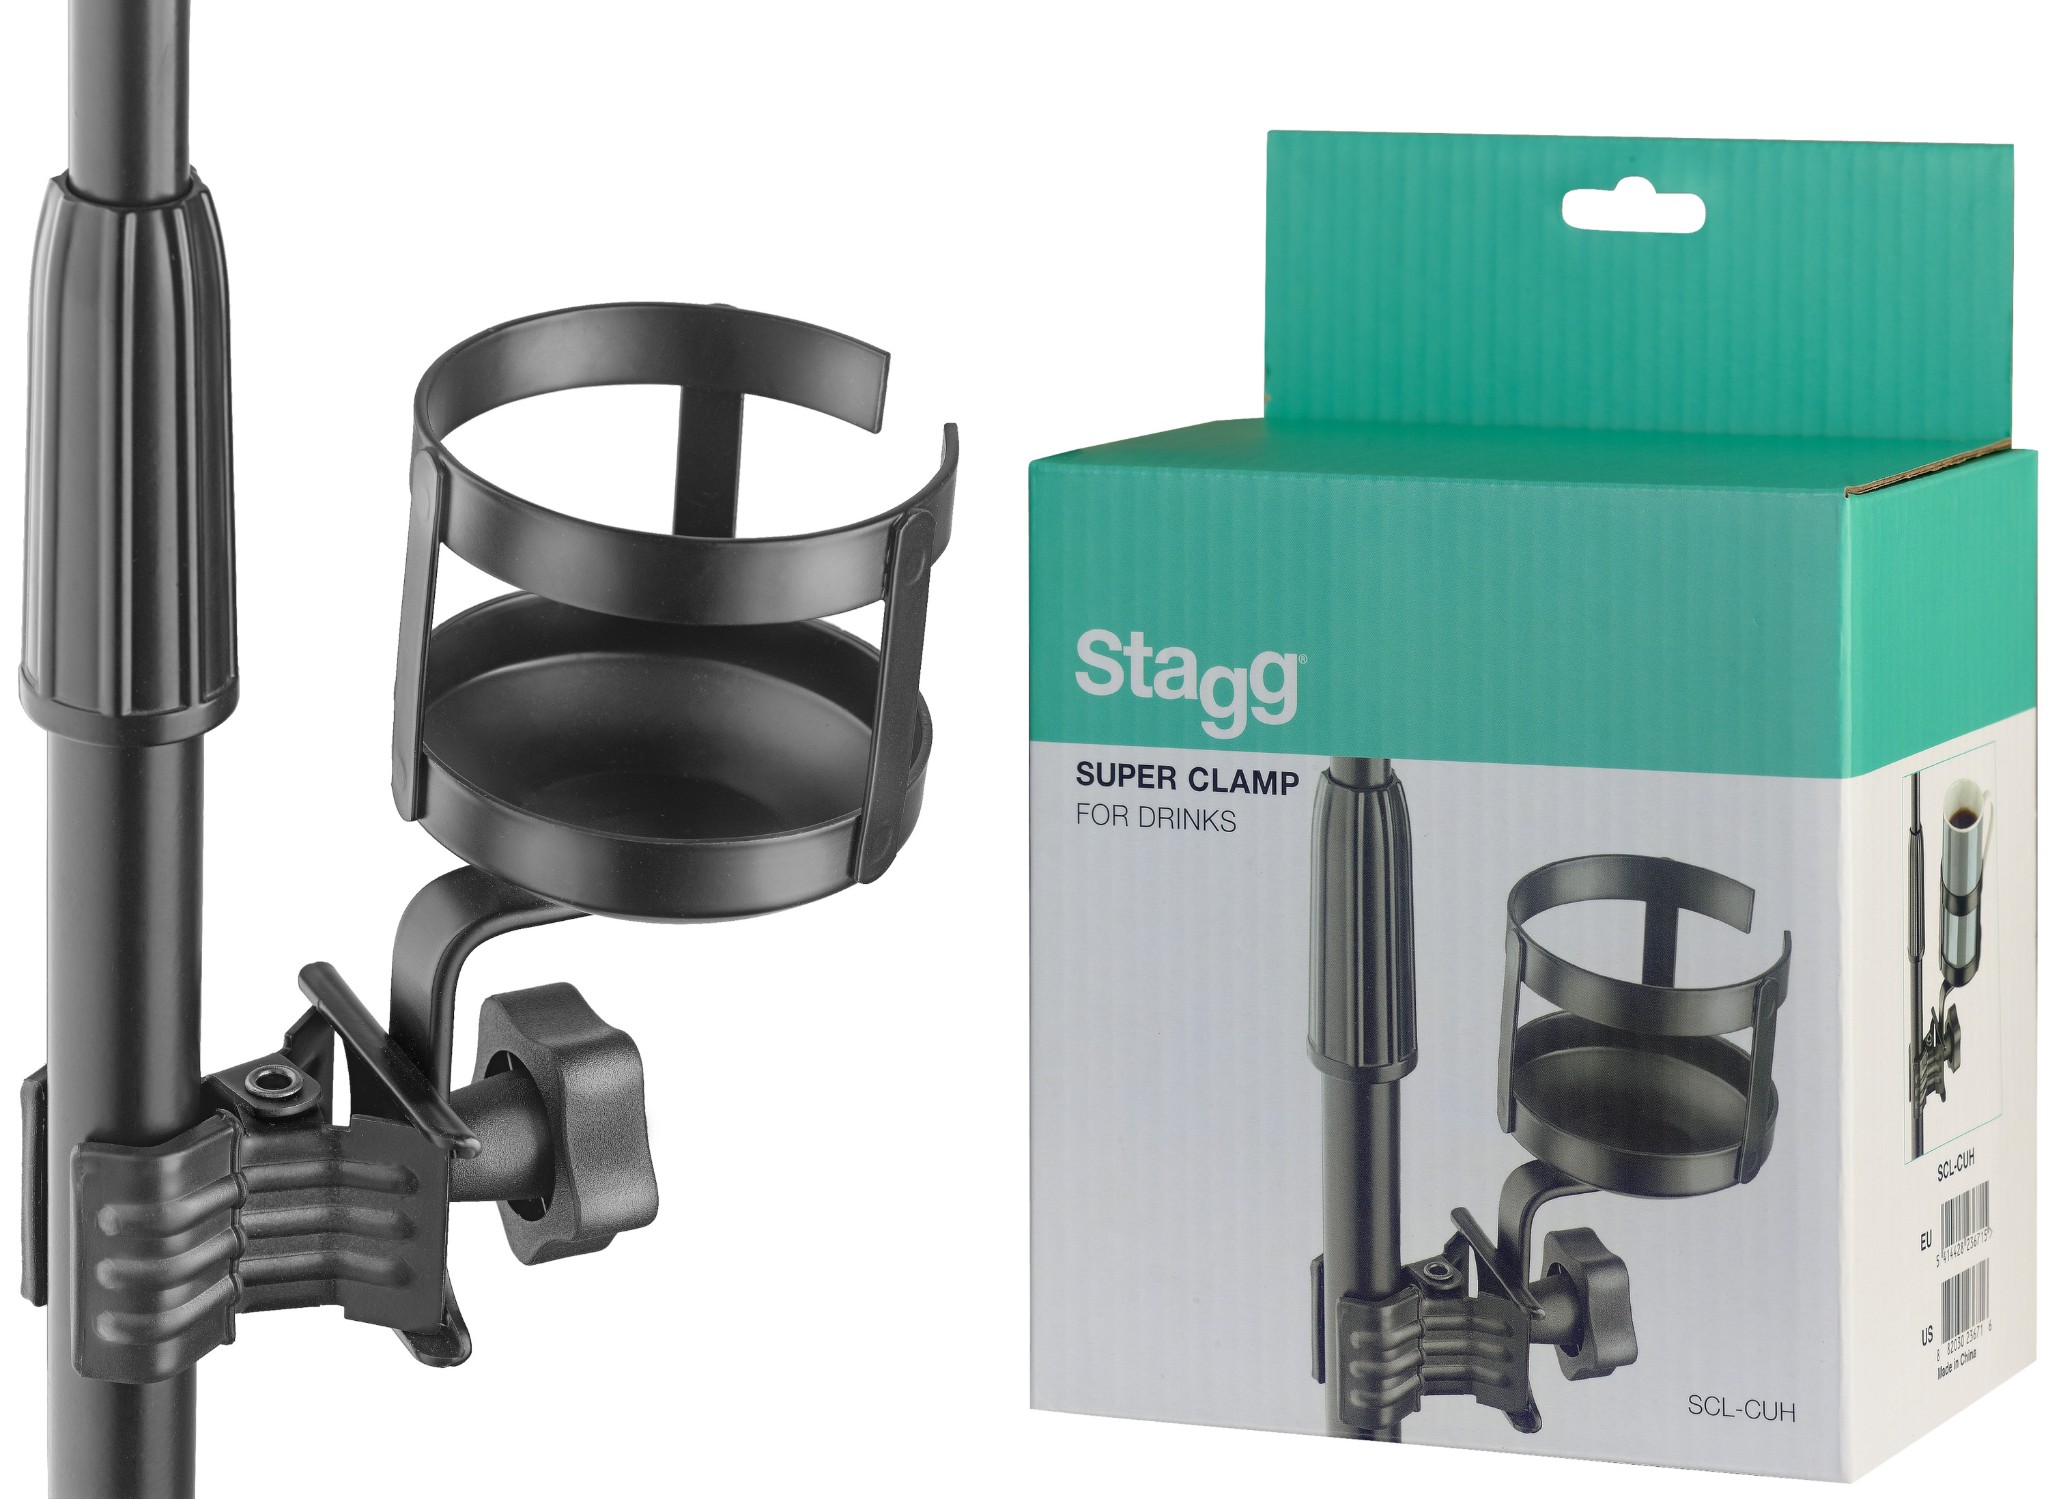 Stagg SCL-CUH Drink Holder With Clamp